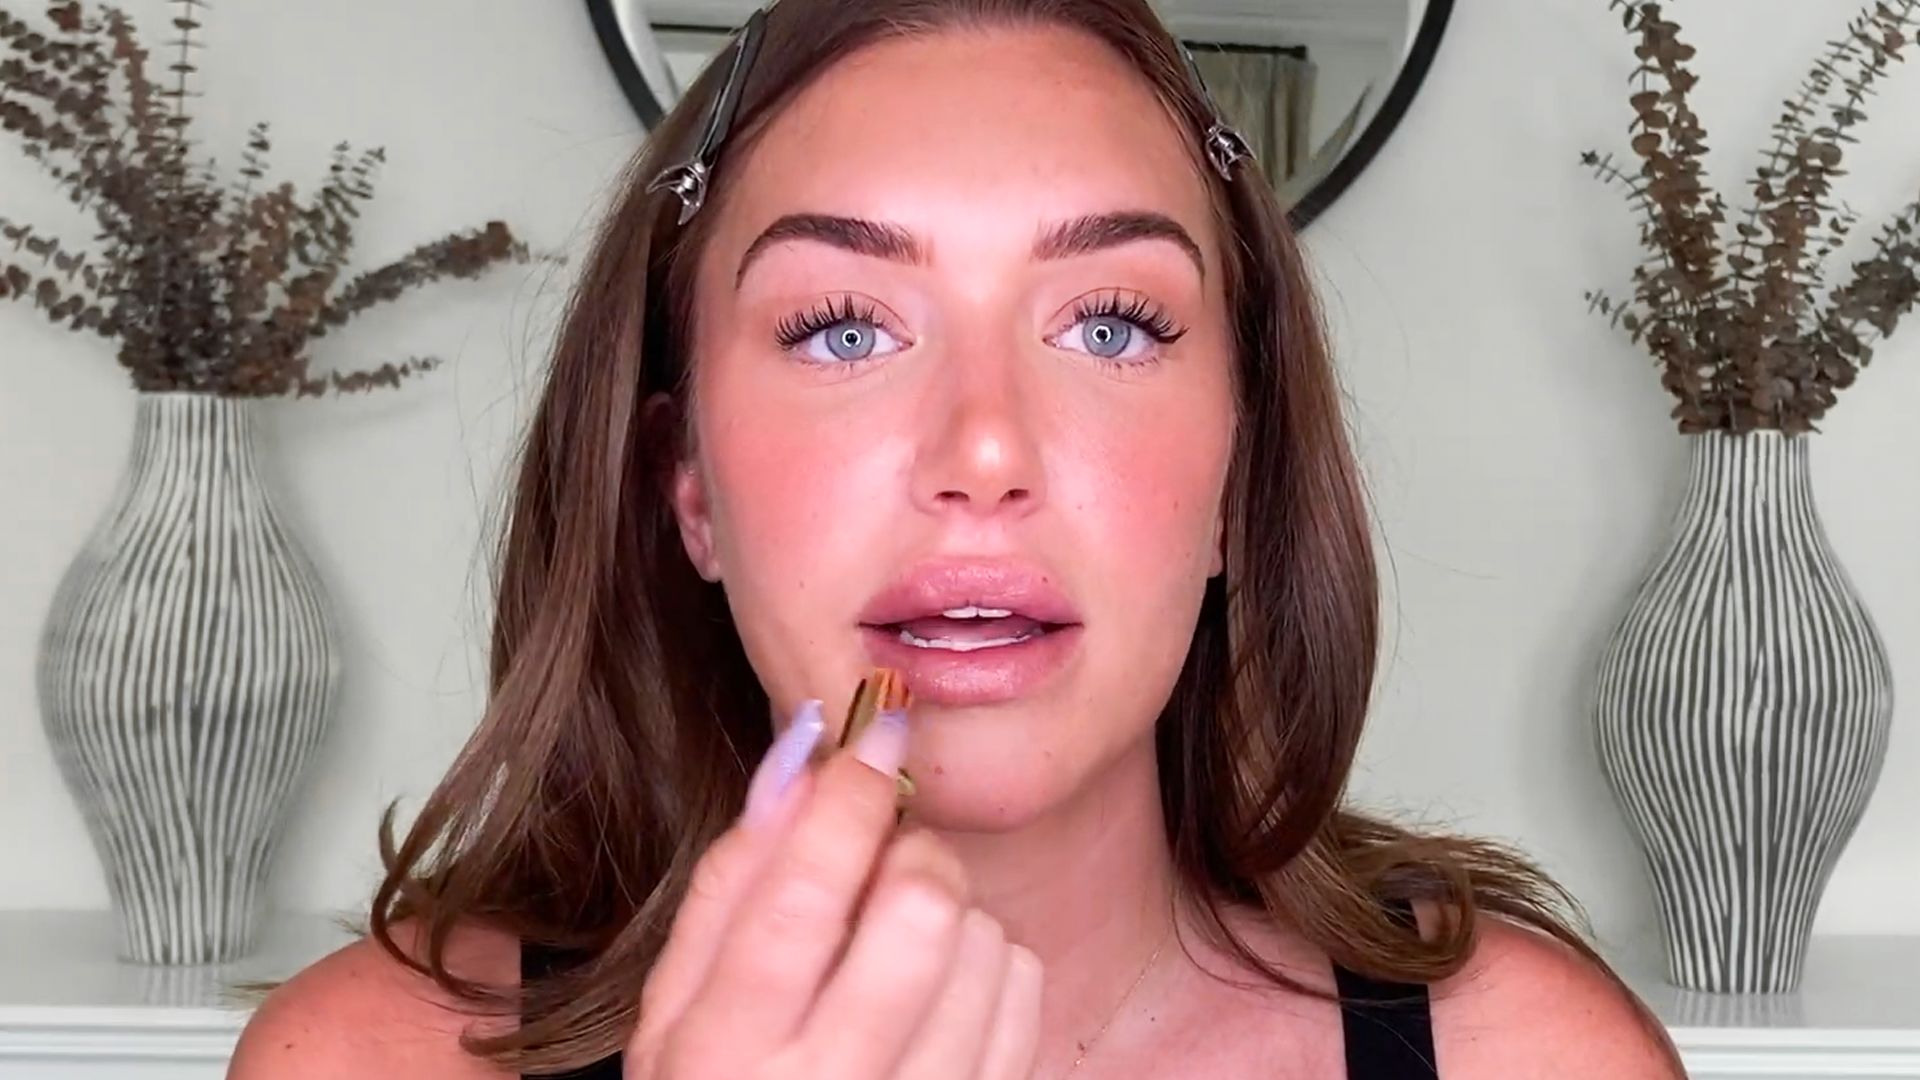 Watch Stassie Baby's 10 Minute Routine for a Sun-Kissed Look